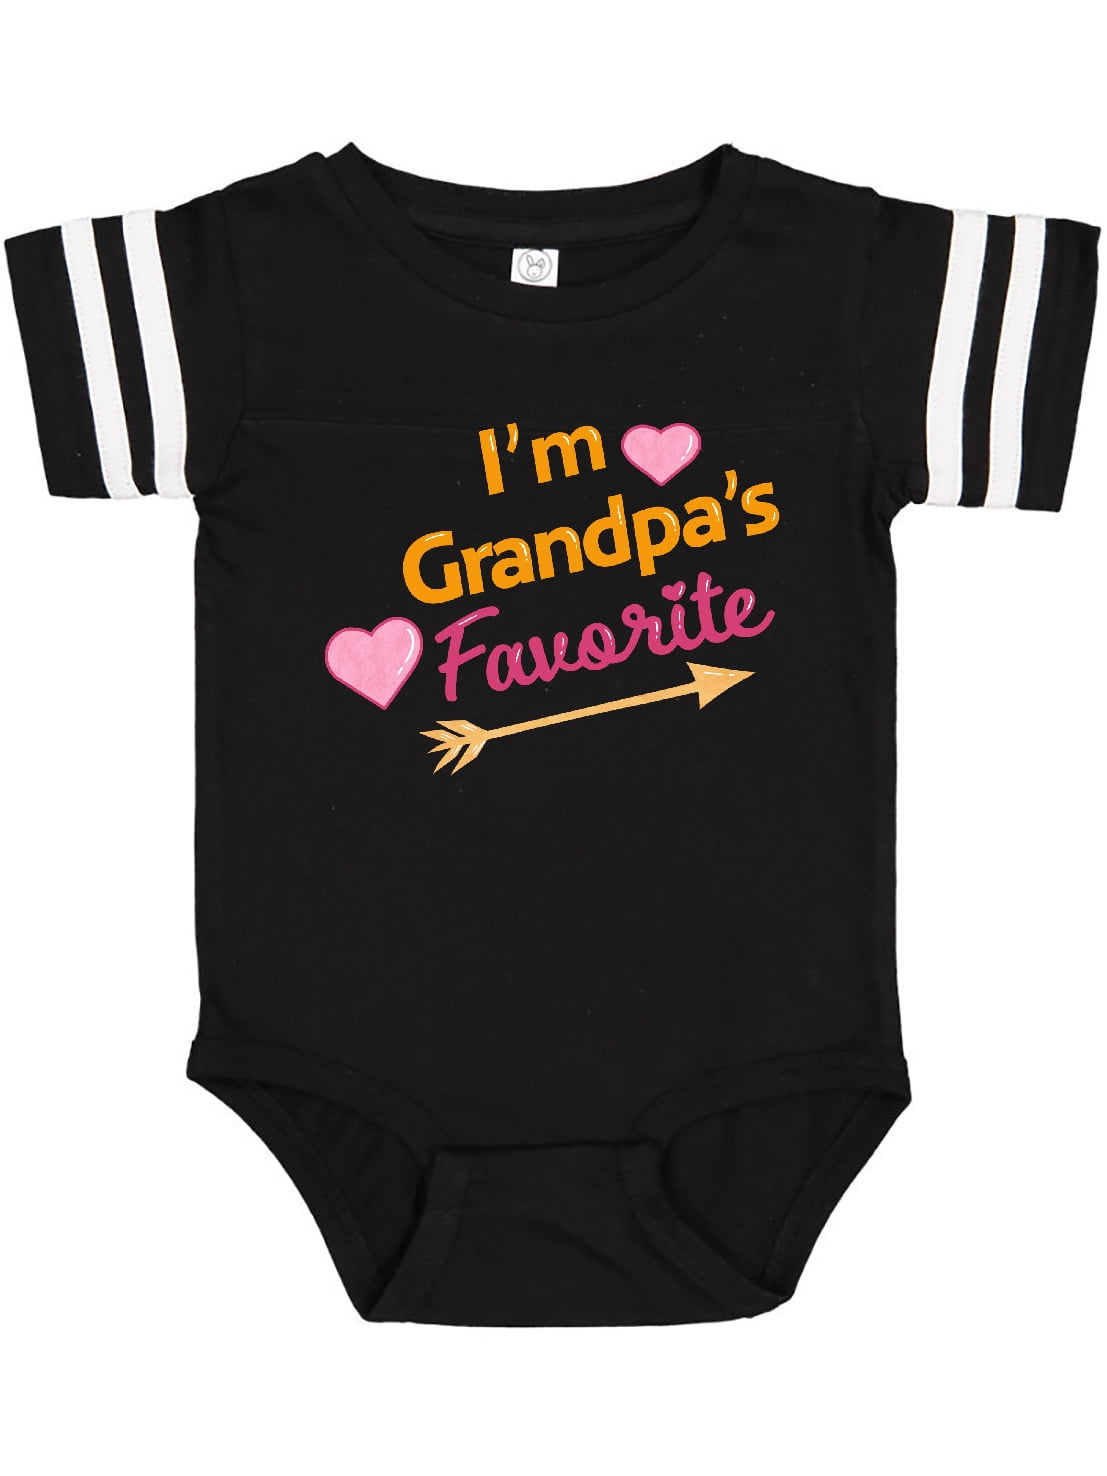 I HAVE THE BEST AUNTIE ARROW PERSONALISED BABY GROW VEST FUNNY GIFT CUTE 